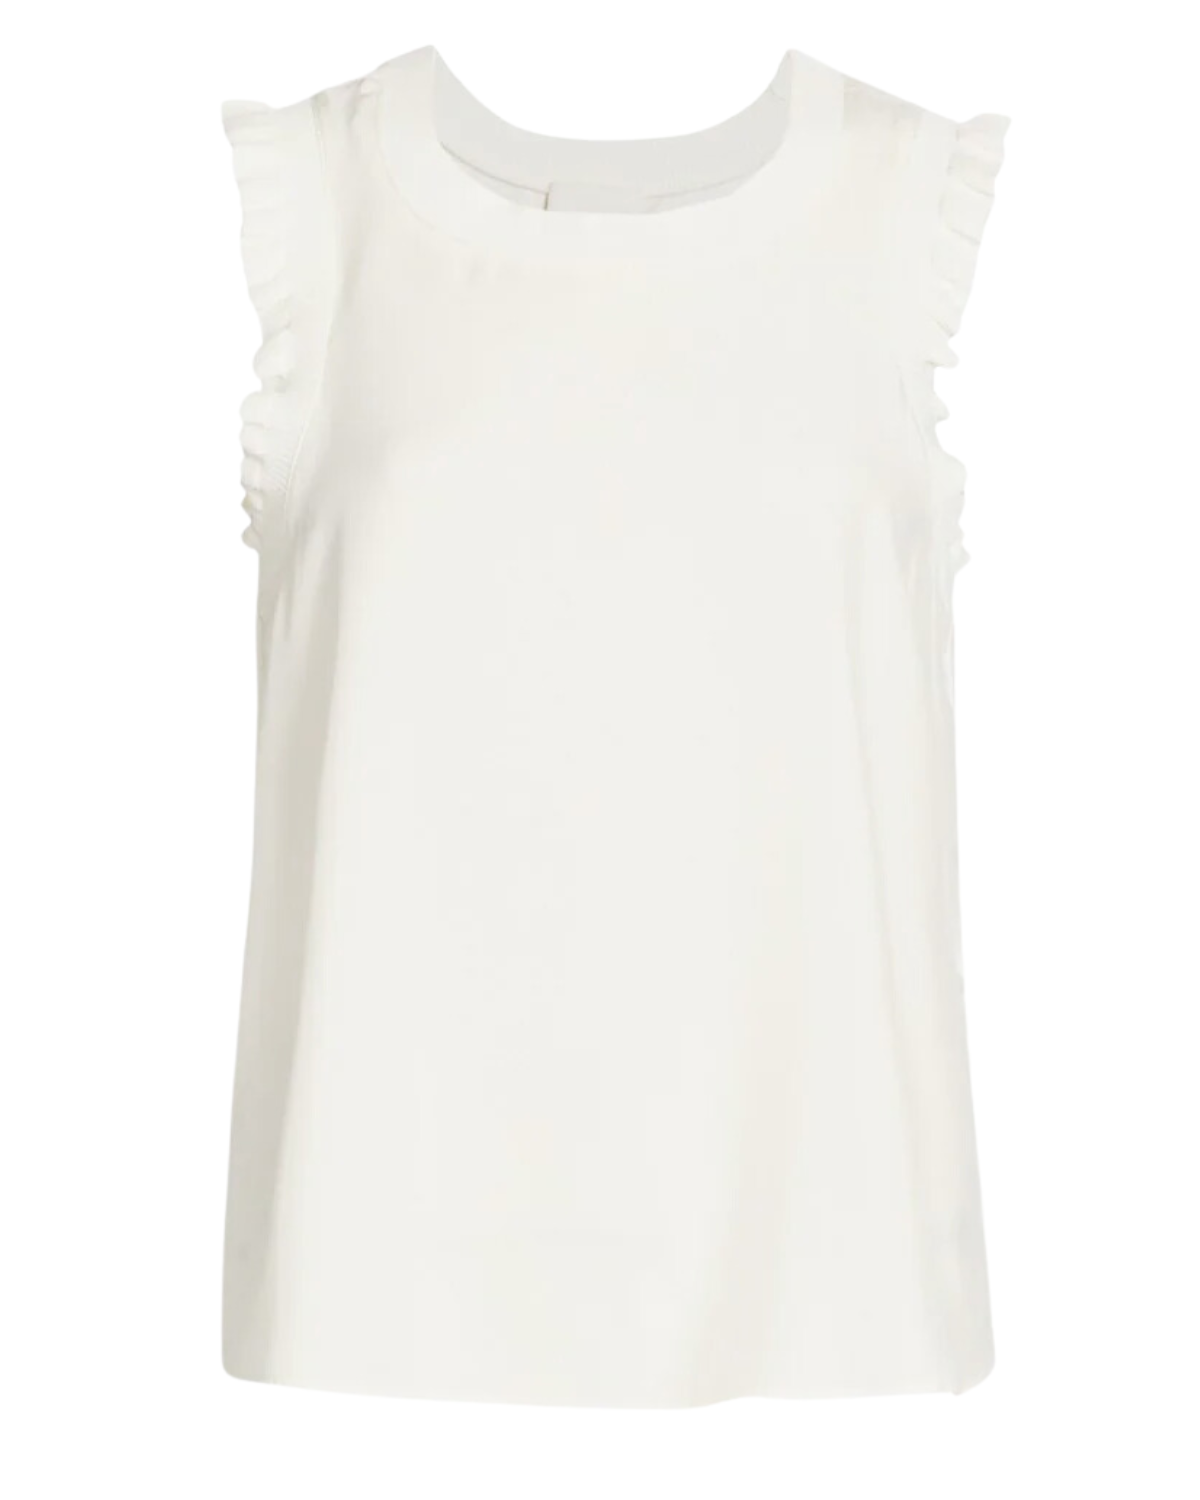 Lenore Top (Ivory)